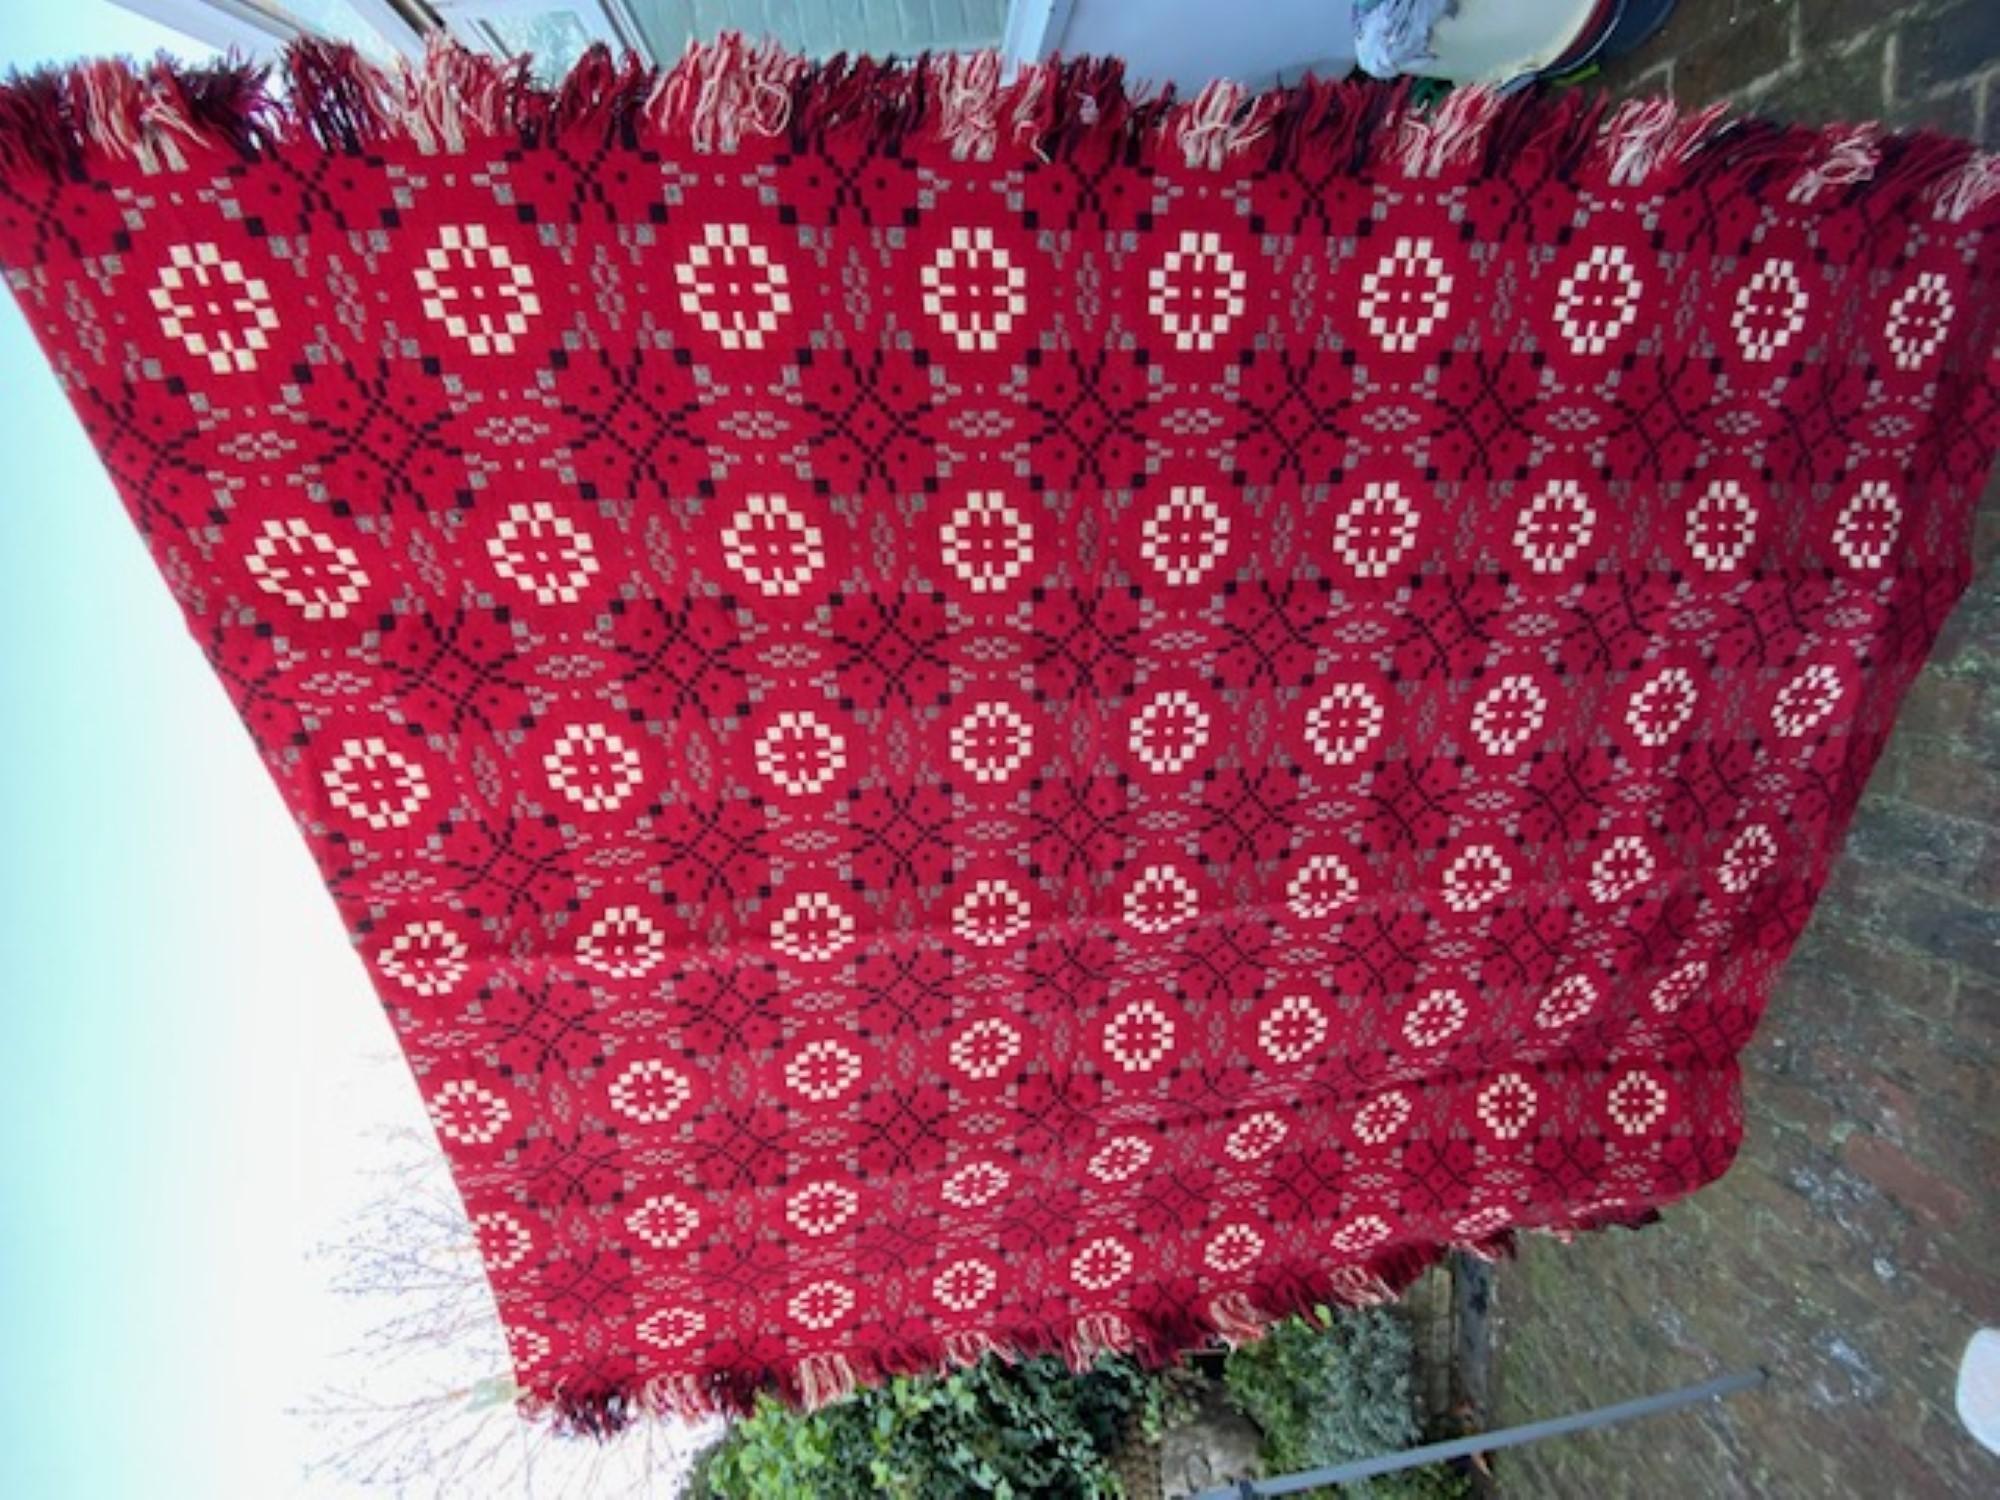 Mid-Century Wool Welsh Tapestry Blanket, 1970s (Red, Black & White)

Beautiful pure wool Welsh Tapestry Blanket in red, black and white colours.  
Reversible, fringed on two sides.  Strong colours, in as new condition.
This blanket has not been